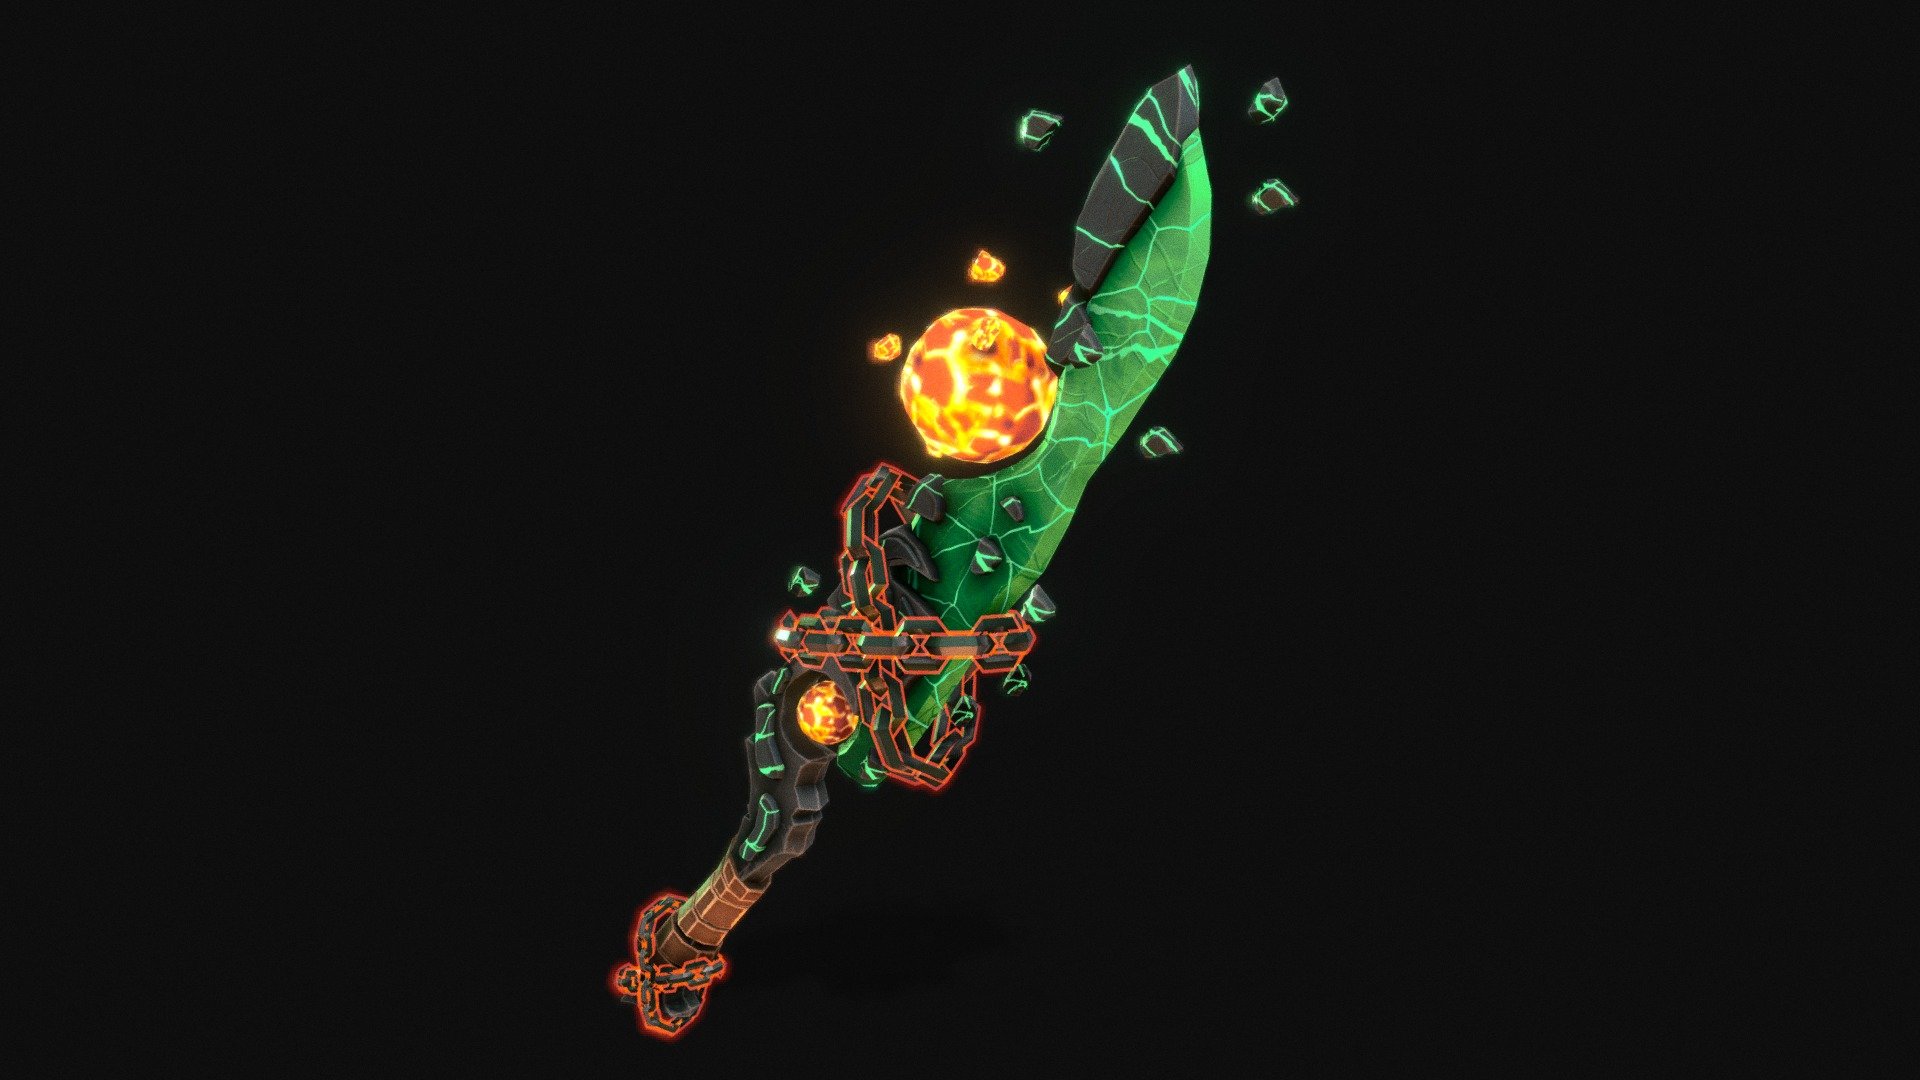 Modeled in Blender
textured in Substancepainter

Follow me for more free contents in the future :) - Earth Slayer Sword - Download Free 3D model by LowPolyBoy 3d model